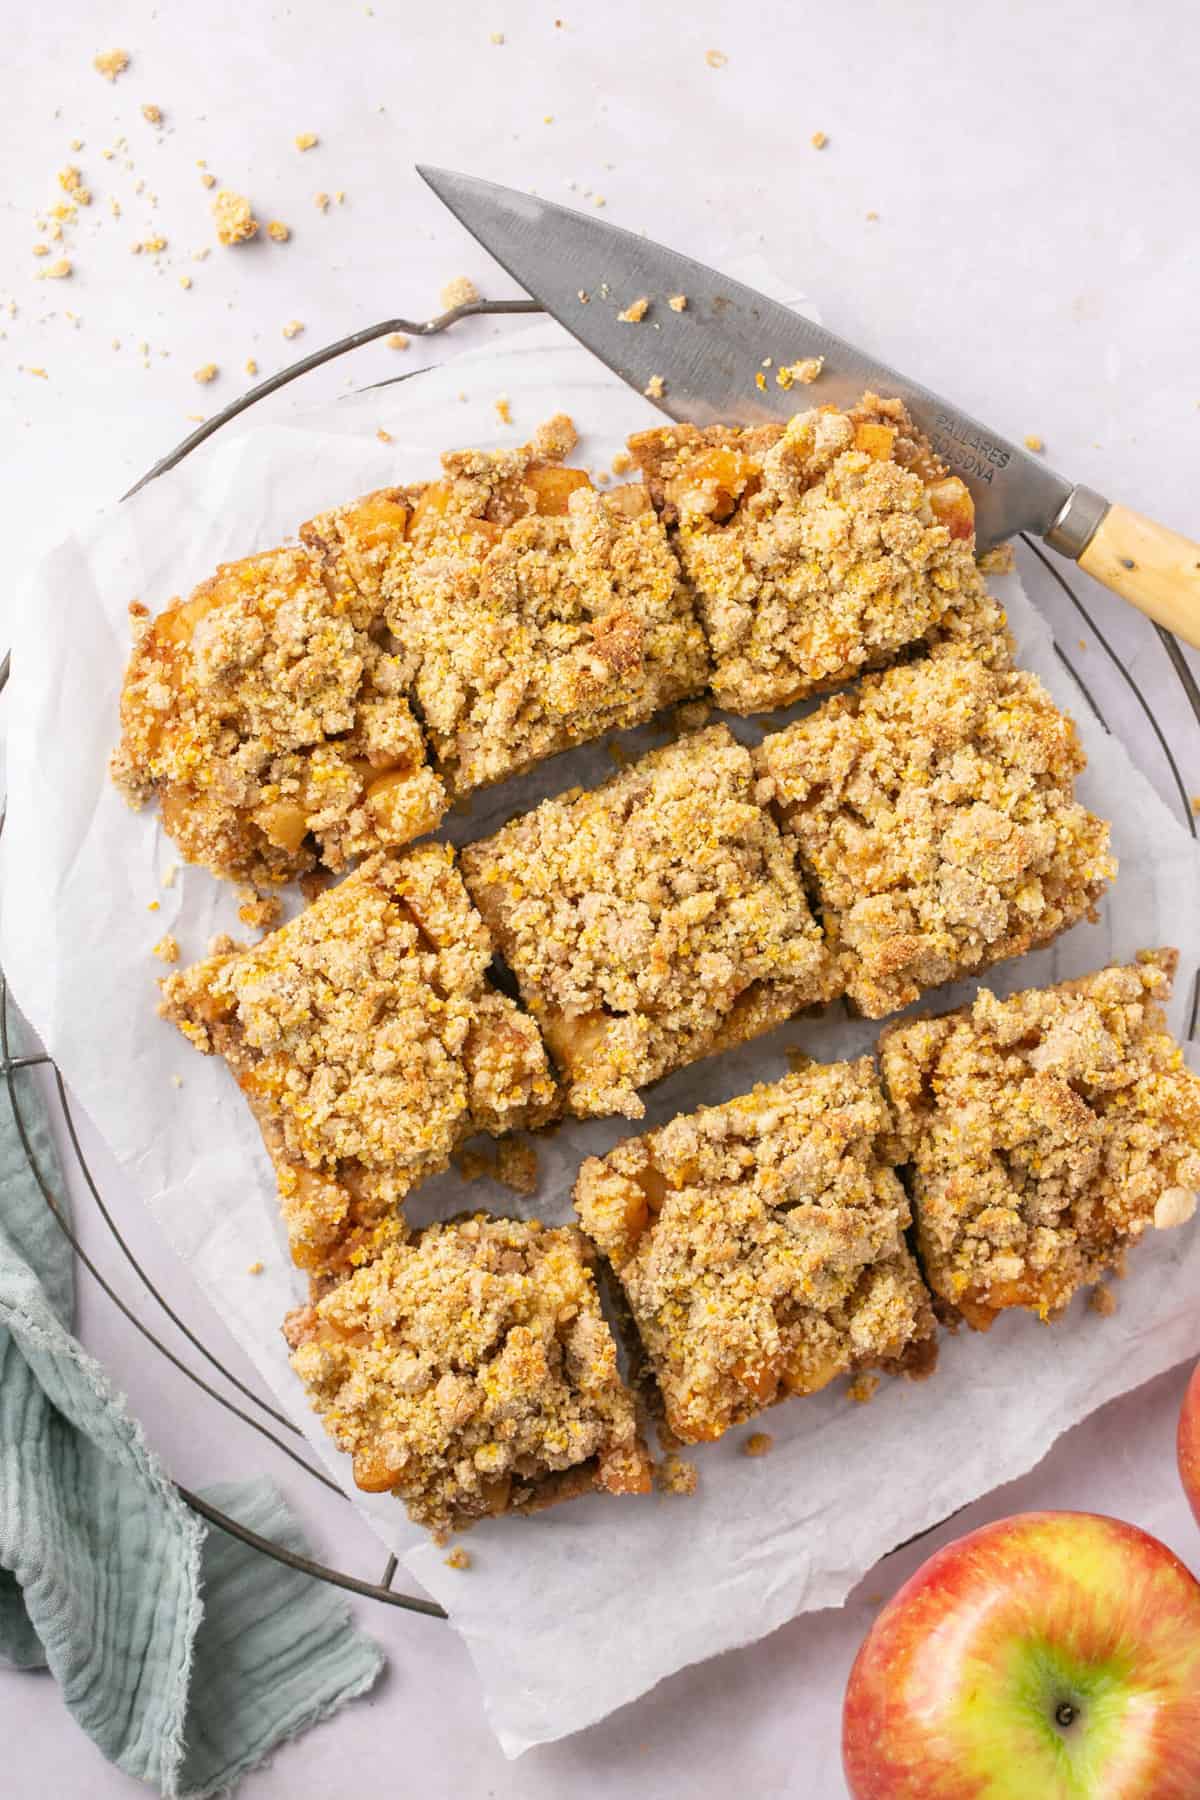 Apple crumble bars cut into pieces, with a knife beside them.